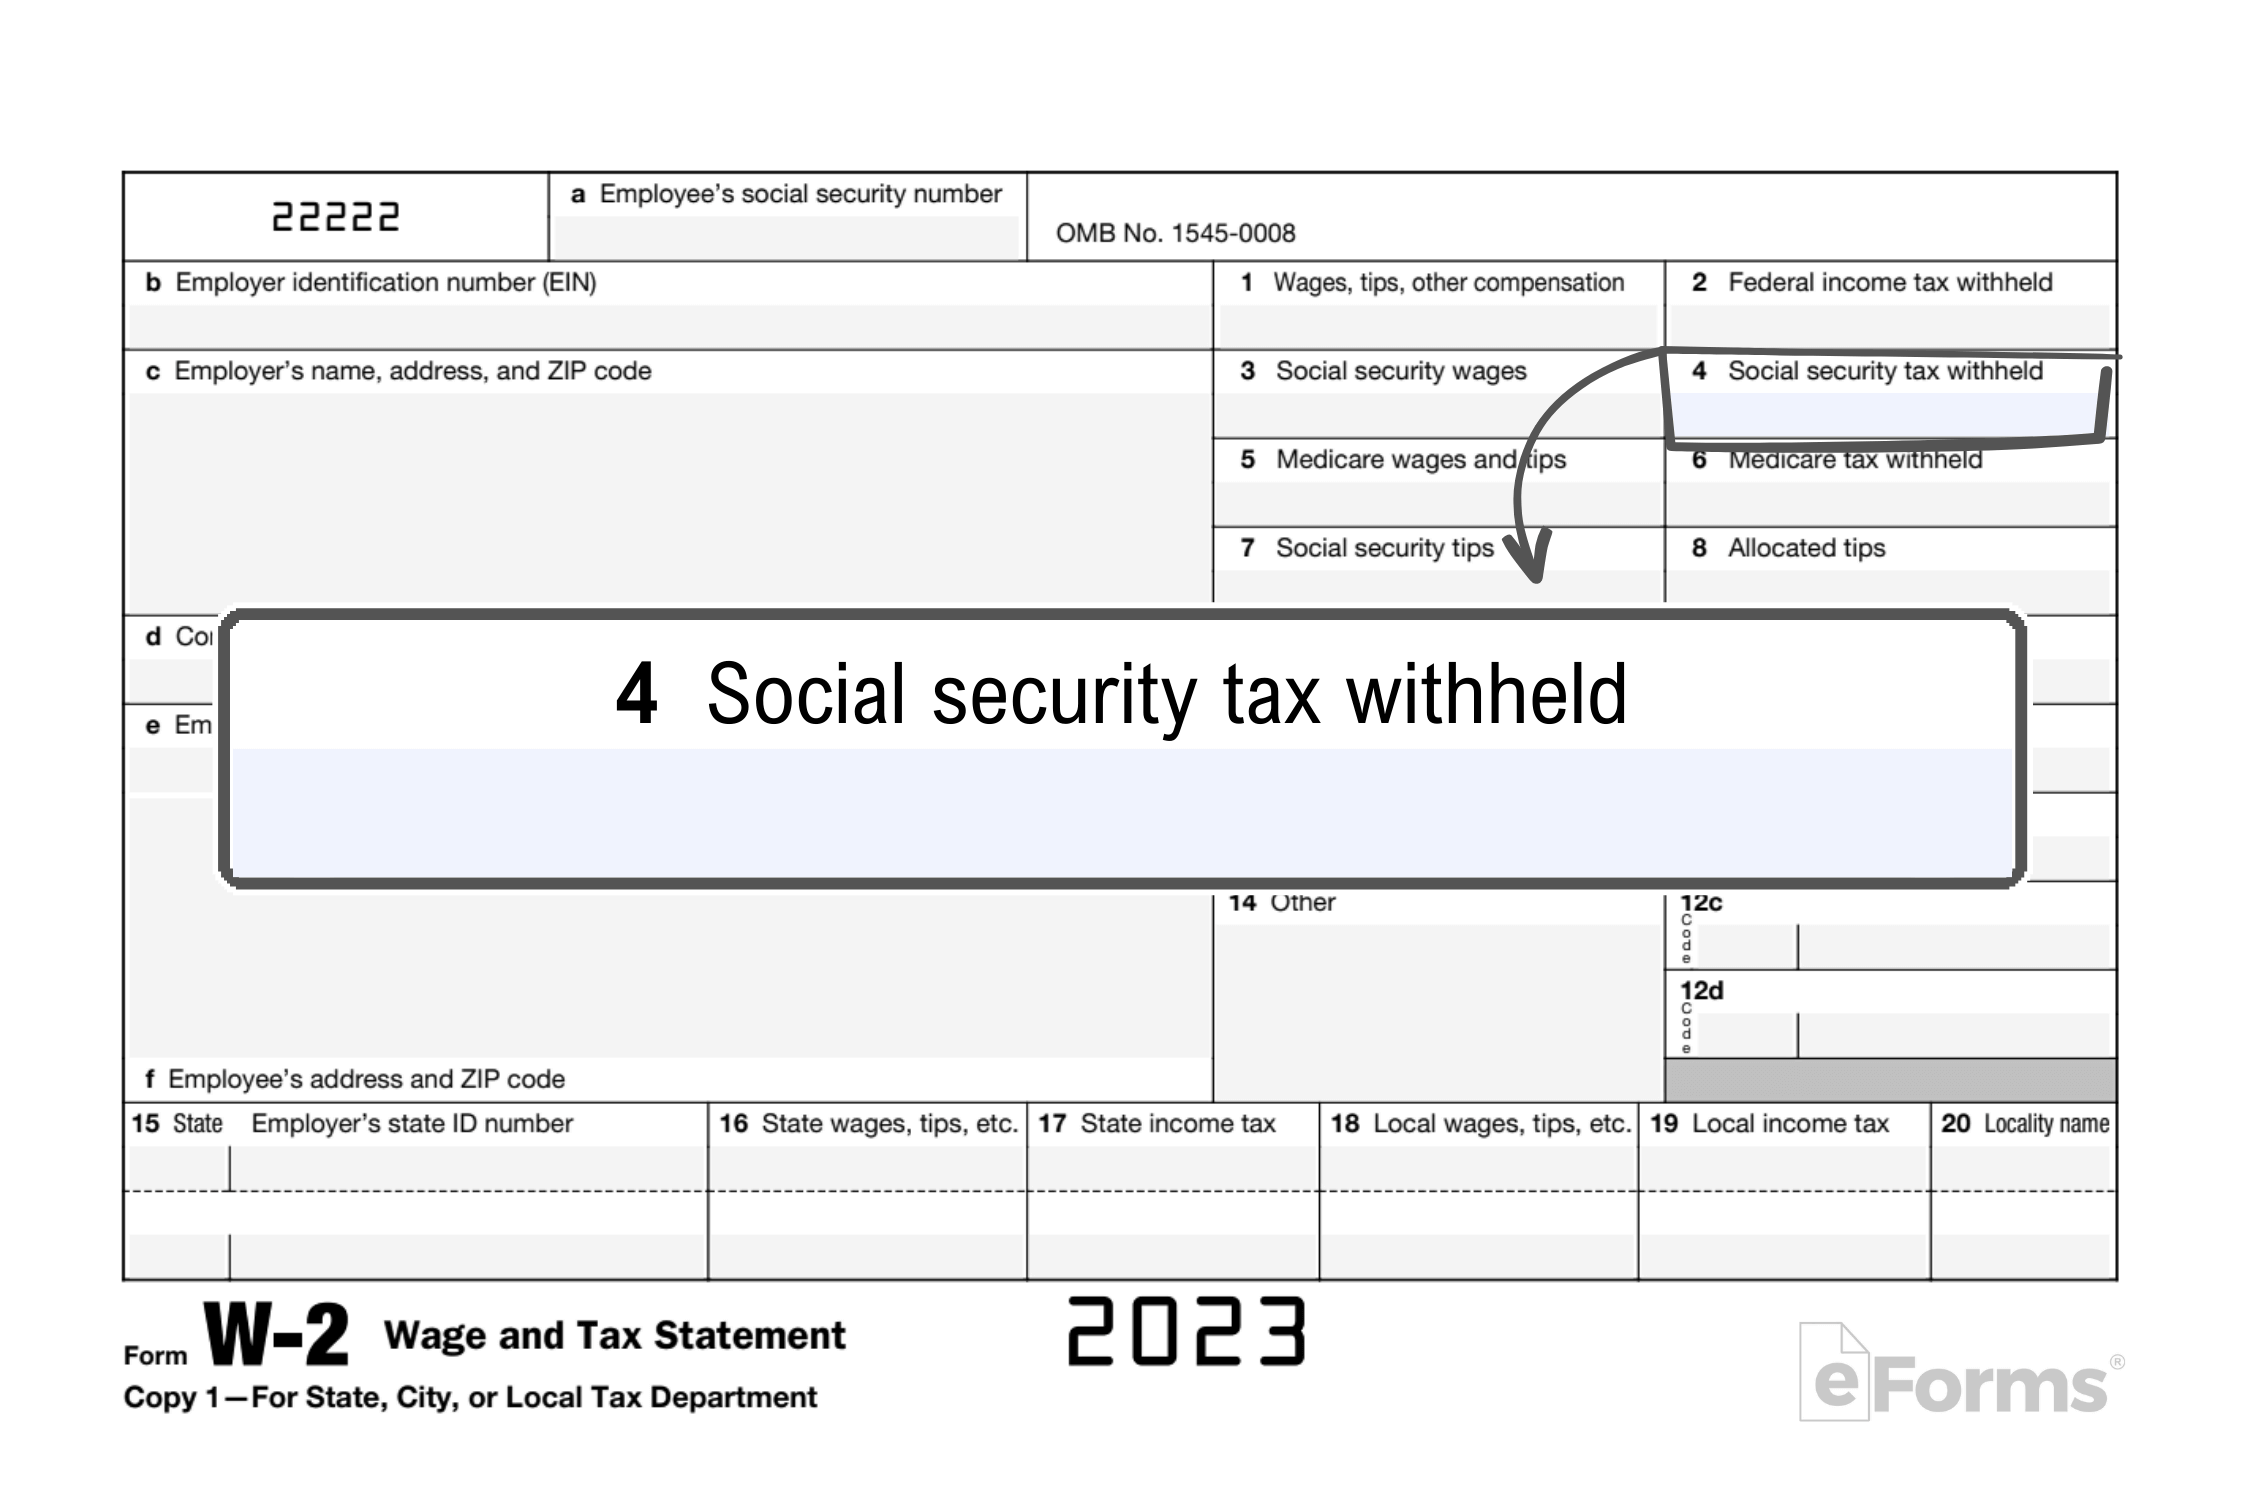 Free Irs Form W-2 | Wage And Tax Statement - Pdf – Eforms within Will I Get A W2 Form From Social Security